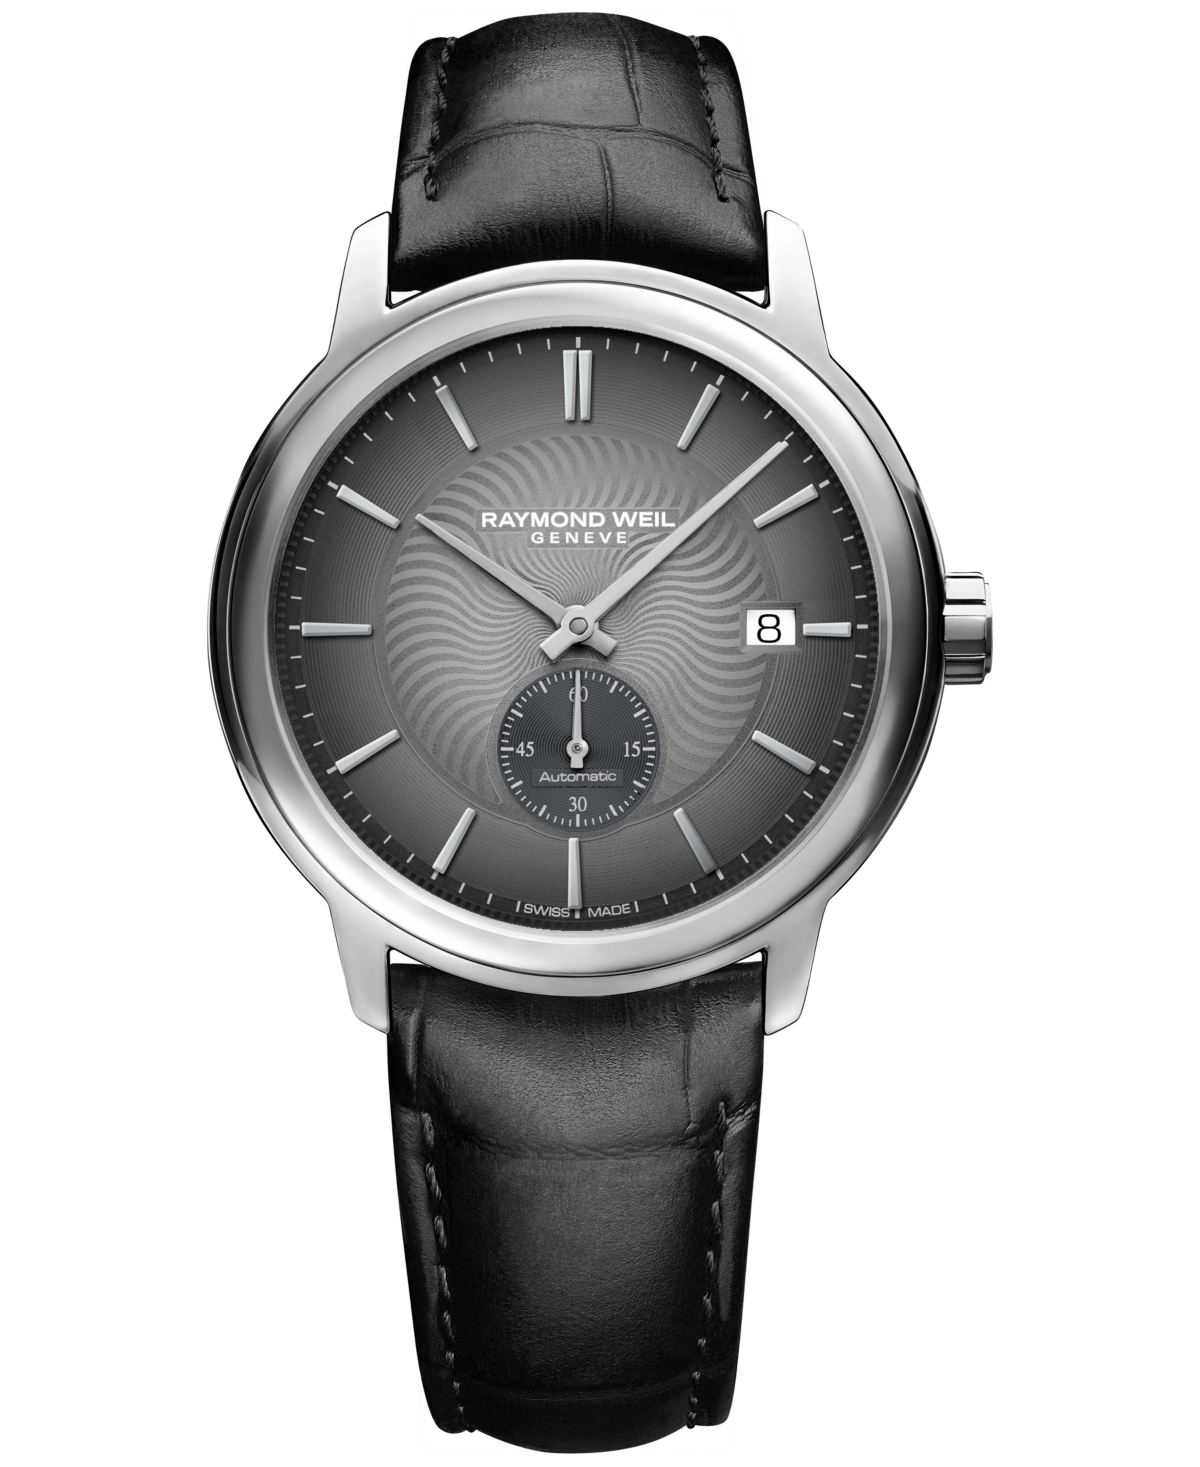 Raymond Weil Men's Swiss Automatic Maestro Small Seconds Black Leather Strap Watch 40mm